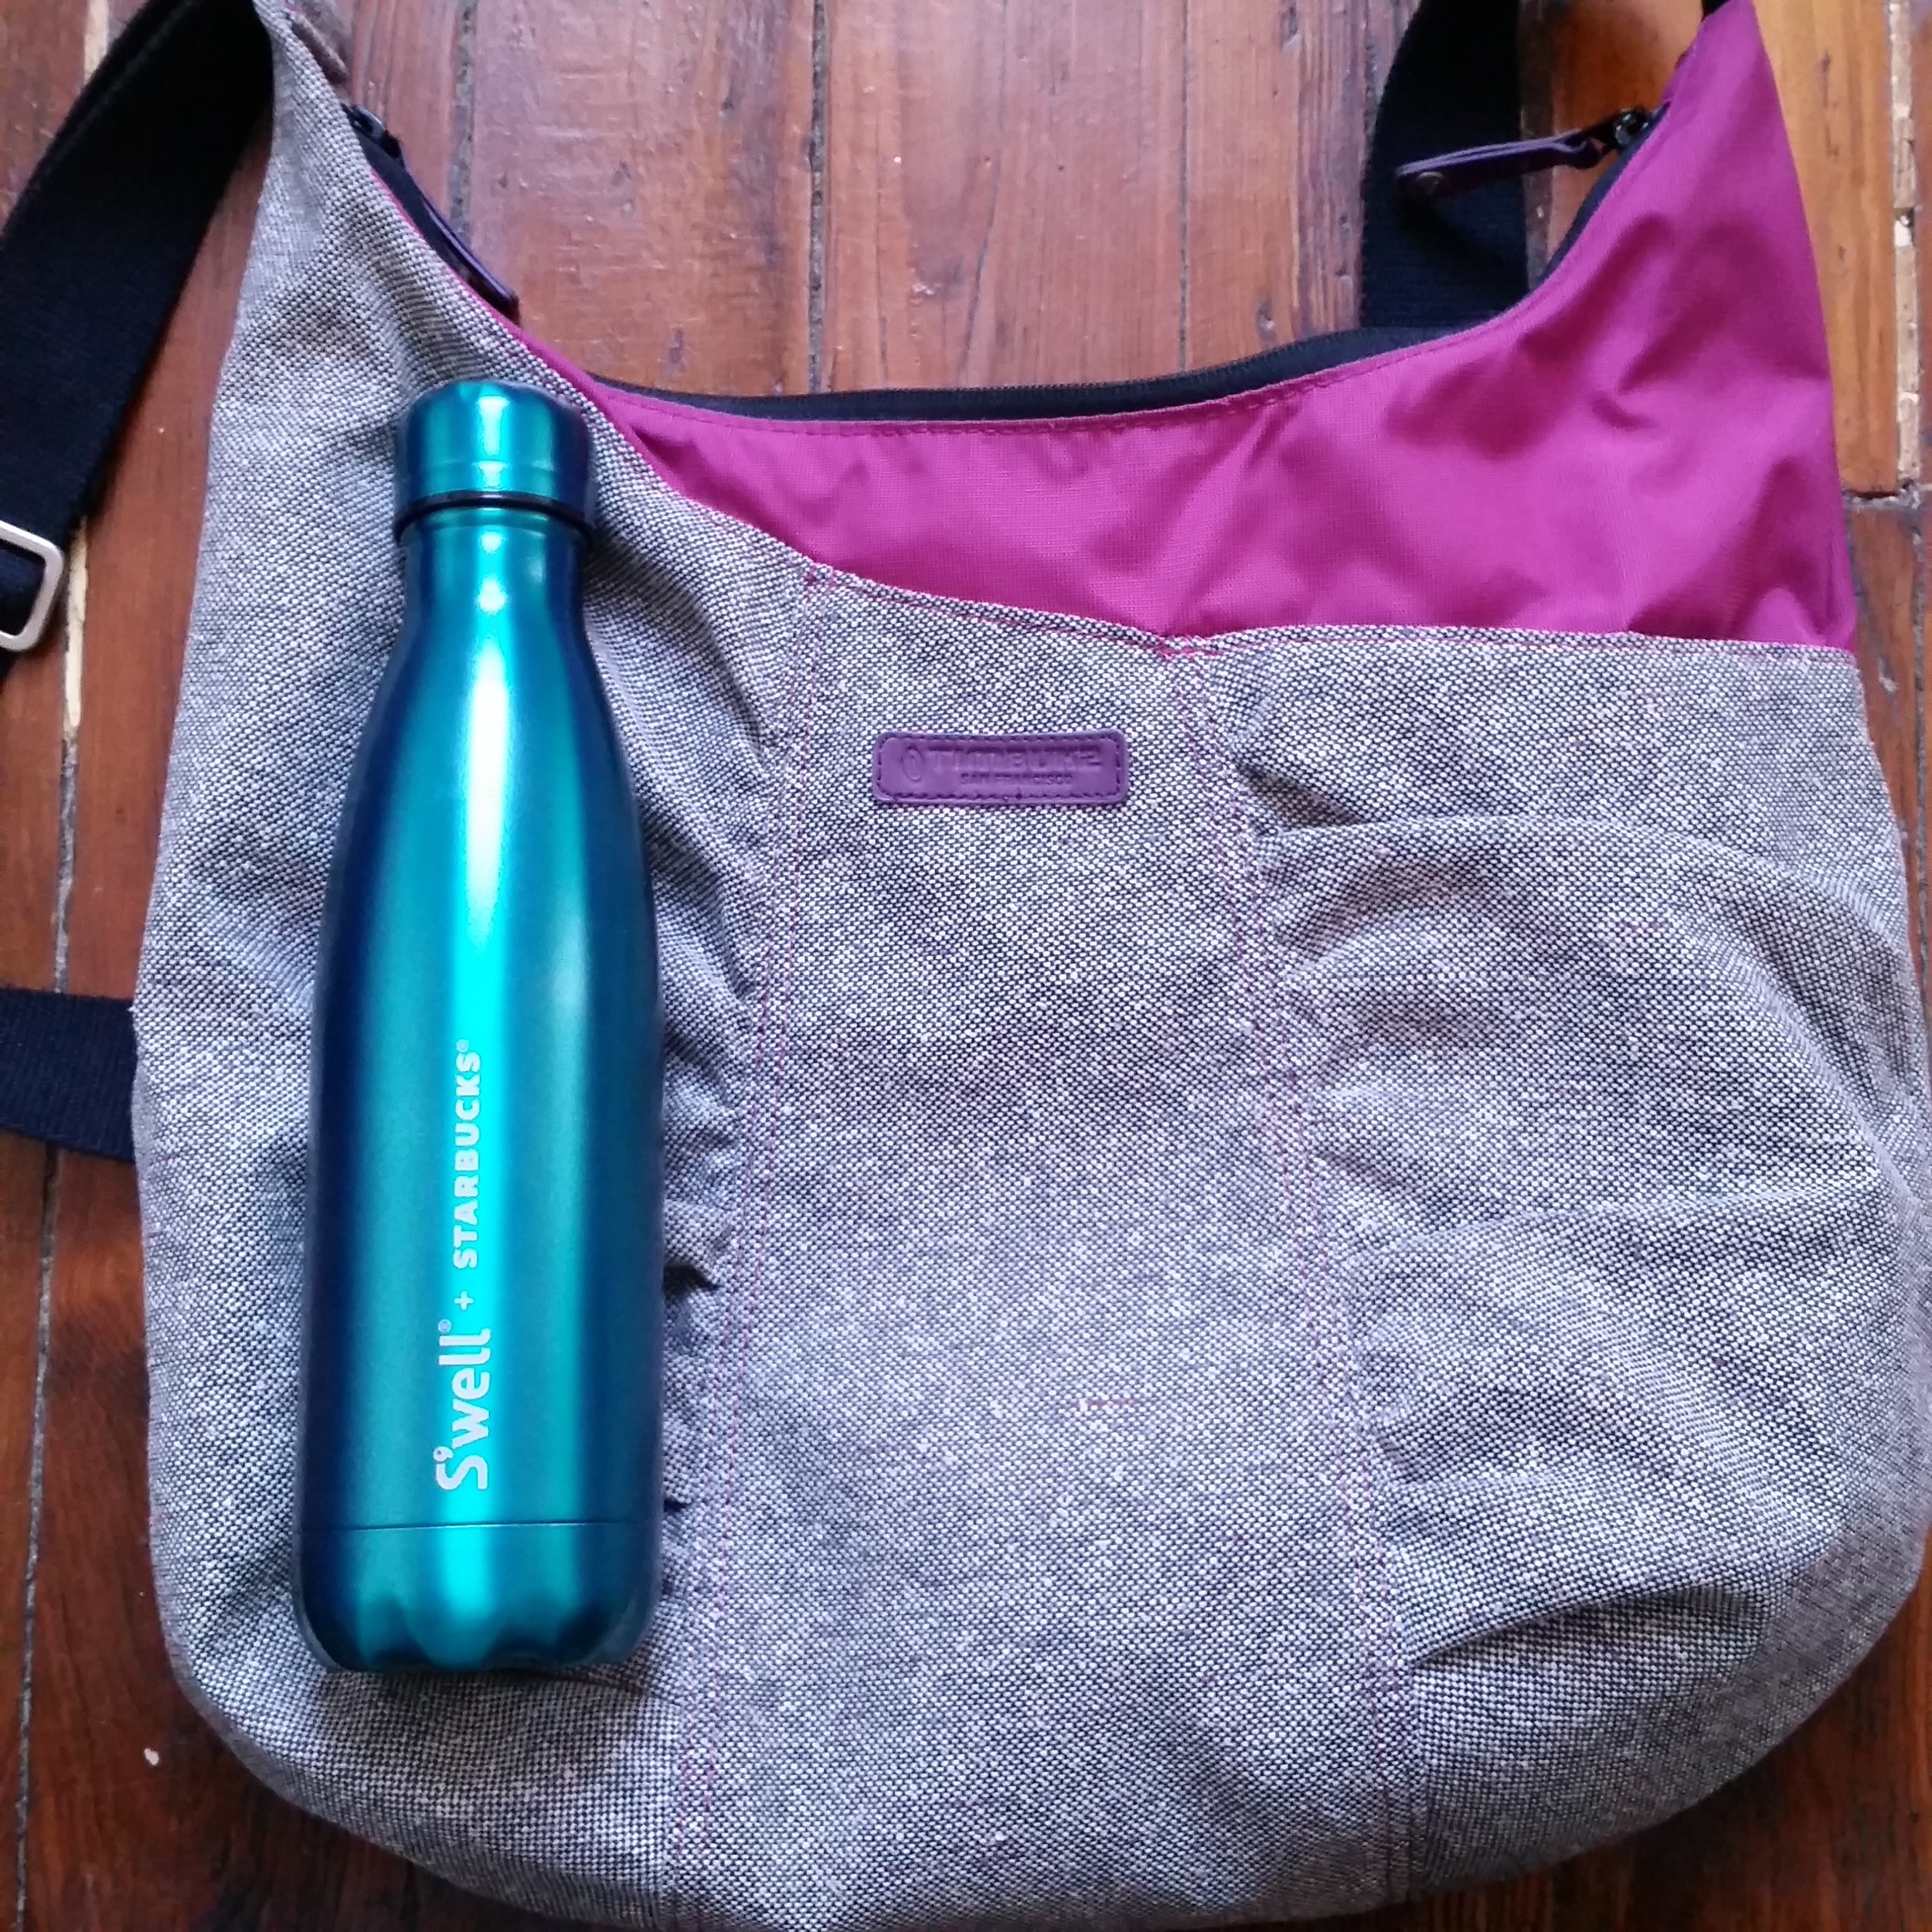  Bag from Timbuk2, bottle from S'well 